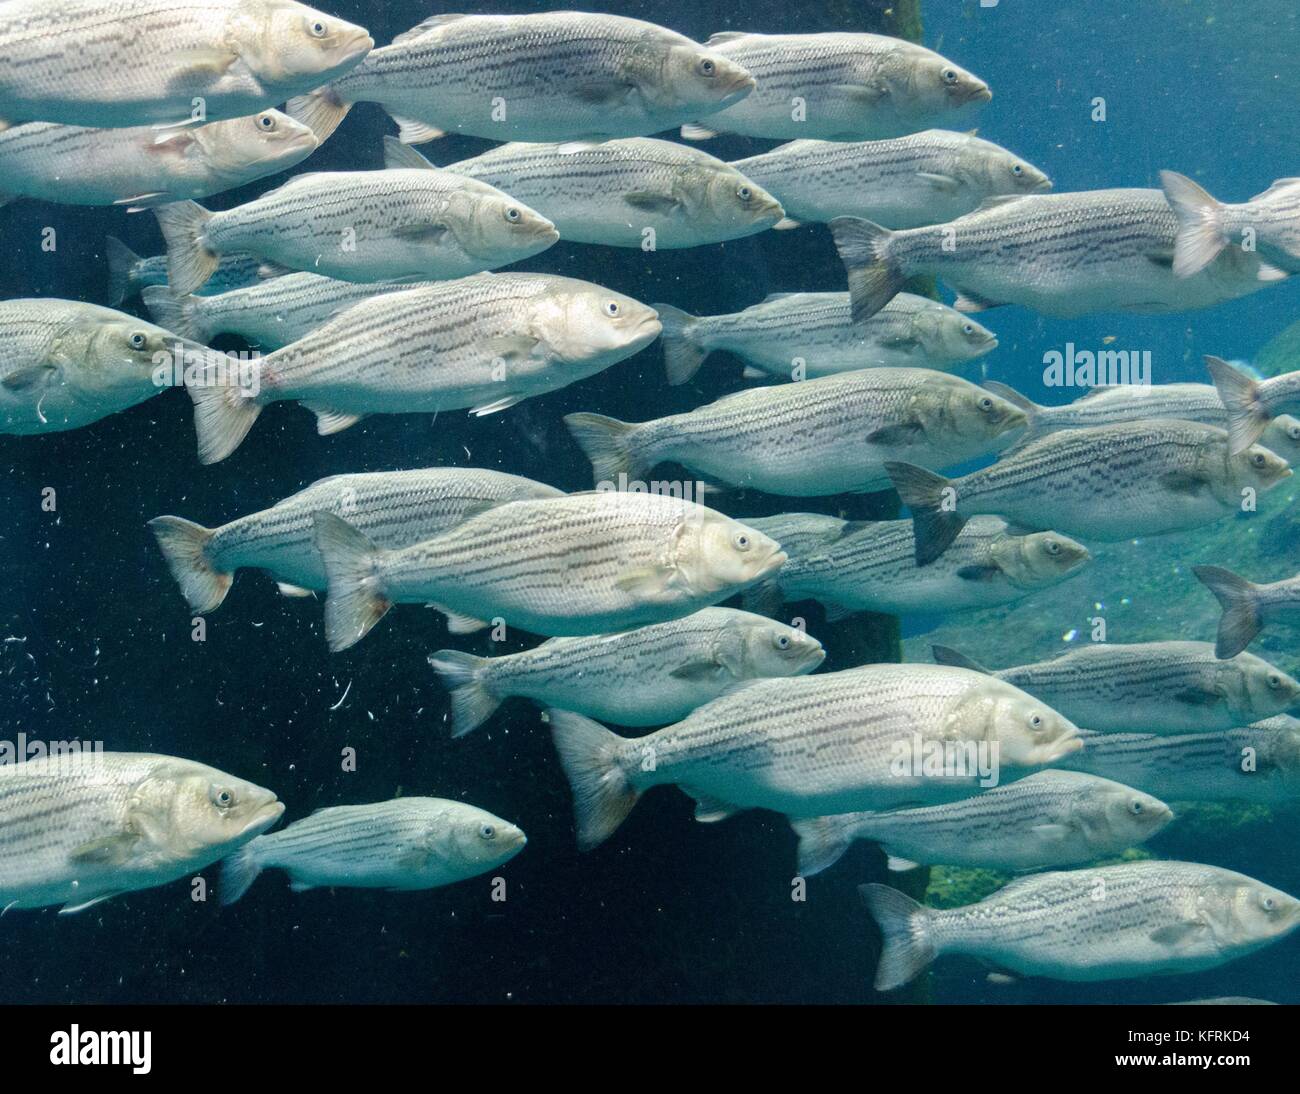 Striped Bass schooling at the Biodôme in Montreal, Quebec. Stock Photo